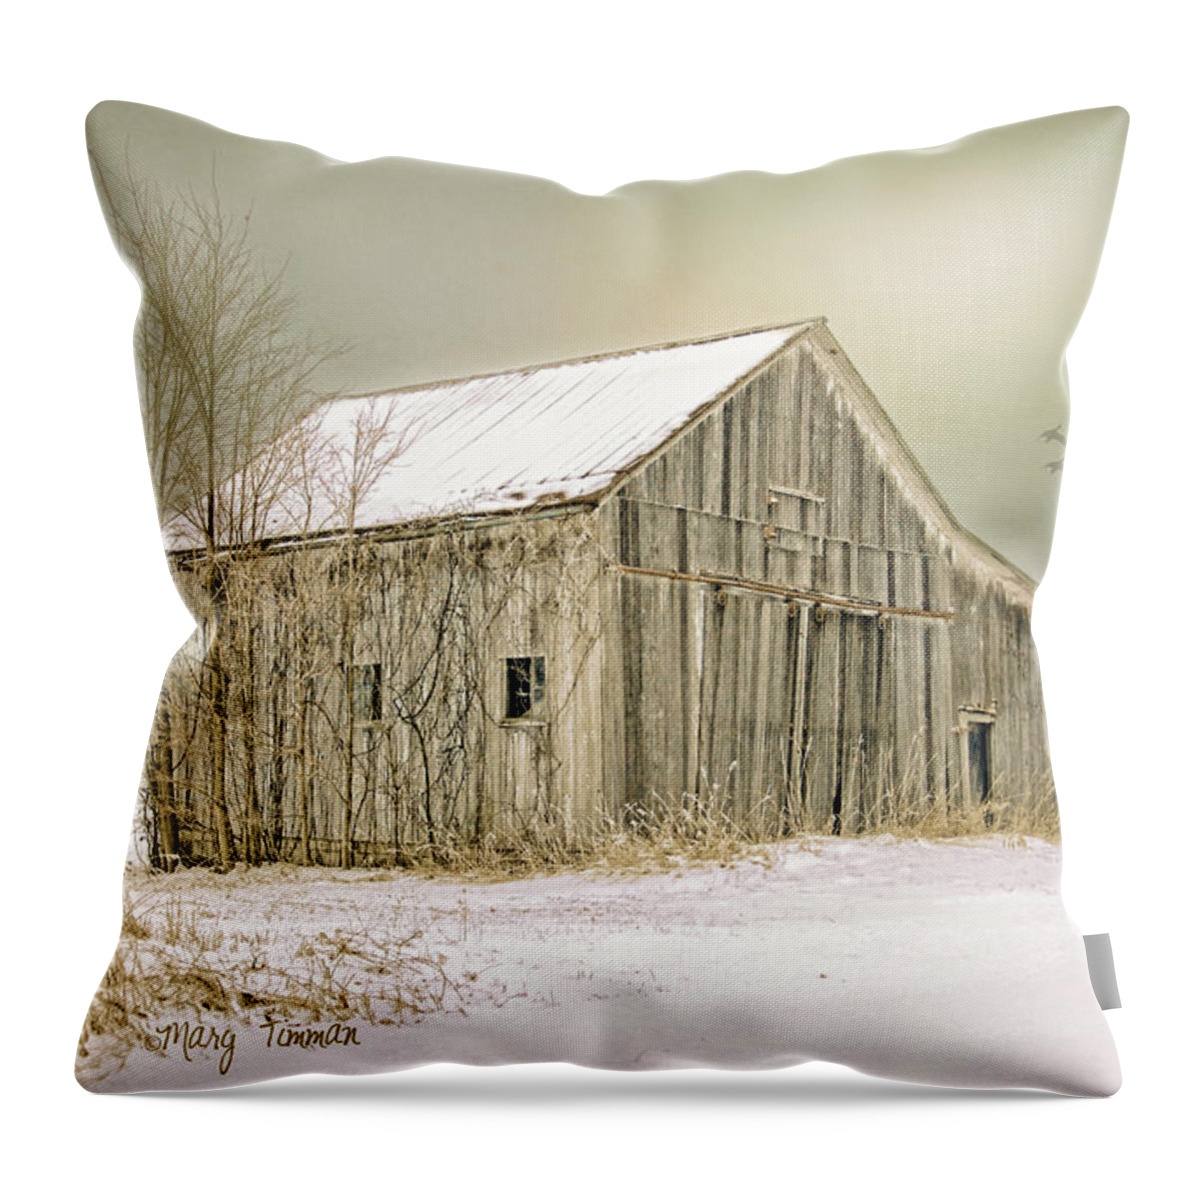 Barns Throw Pillow featuring the photograph Winter's Barn #1 by Mary Timman